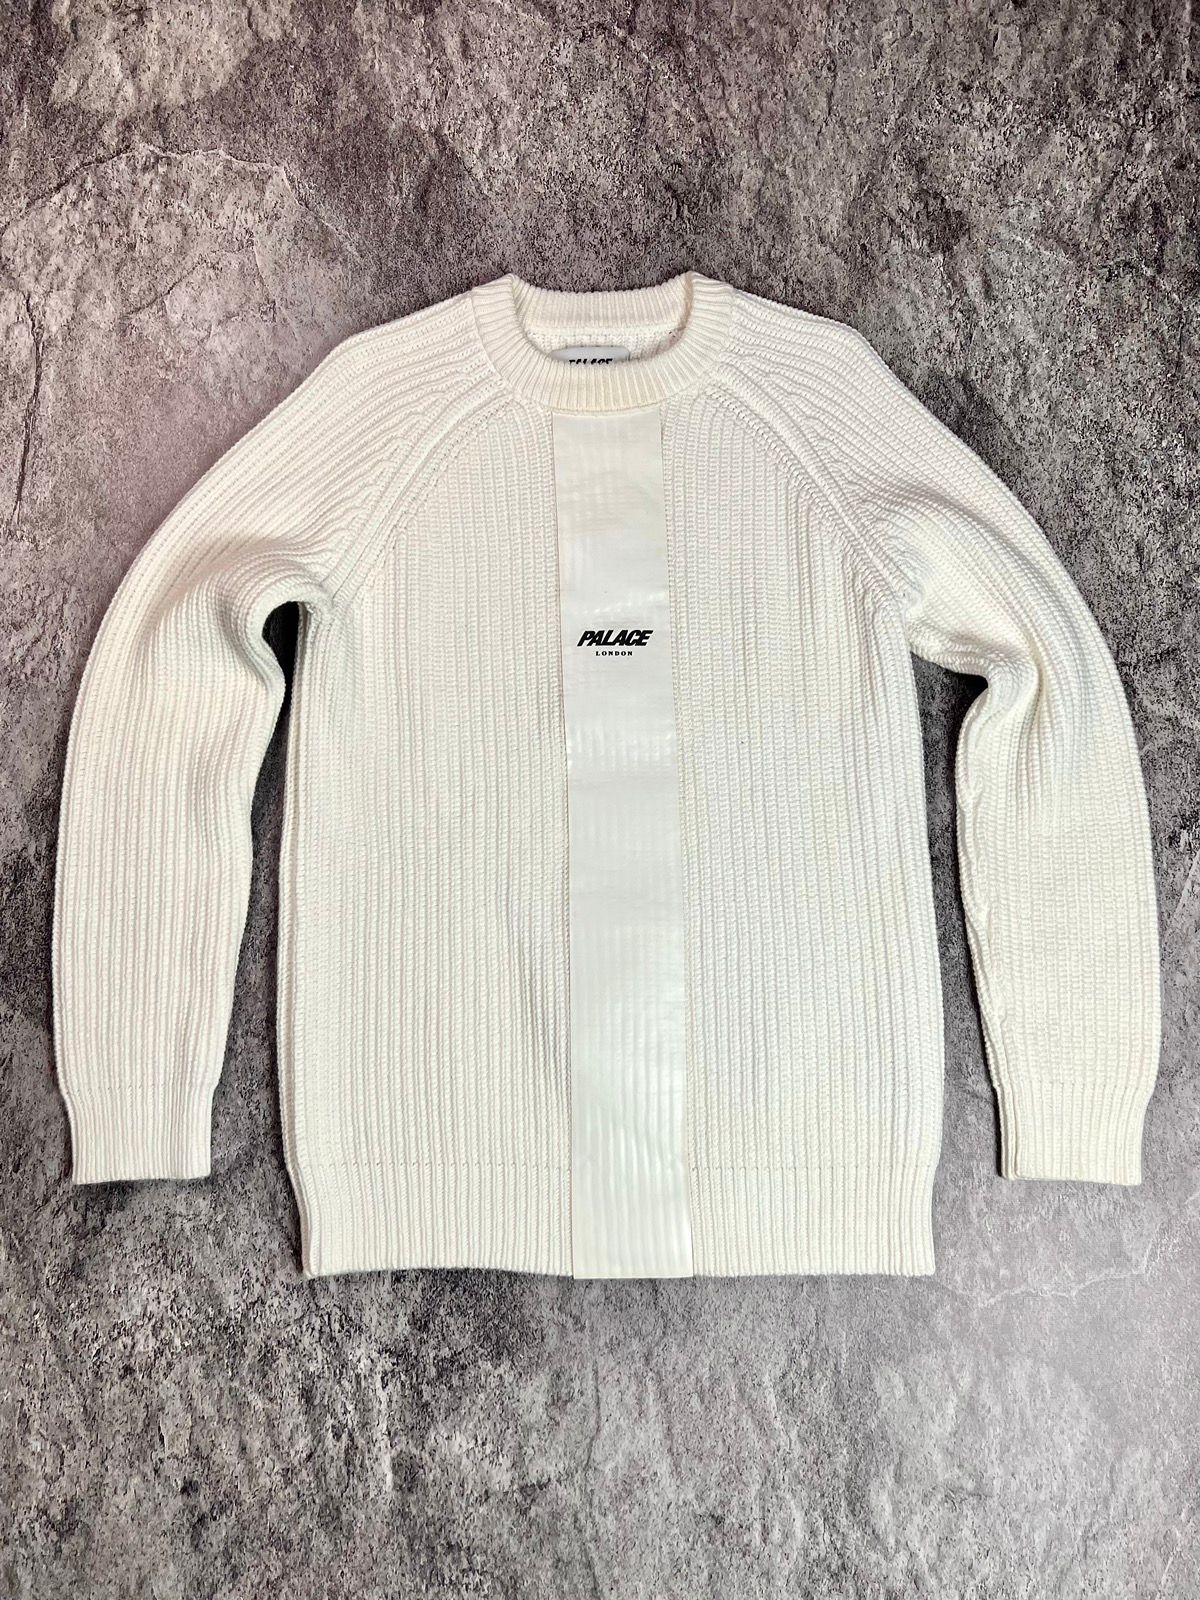 Pre-owned Palace R Knit Fisherman Heavyweight Japan Style Sweater In Beige